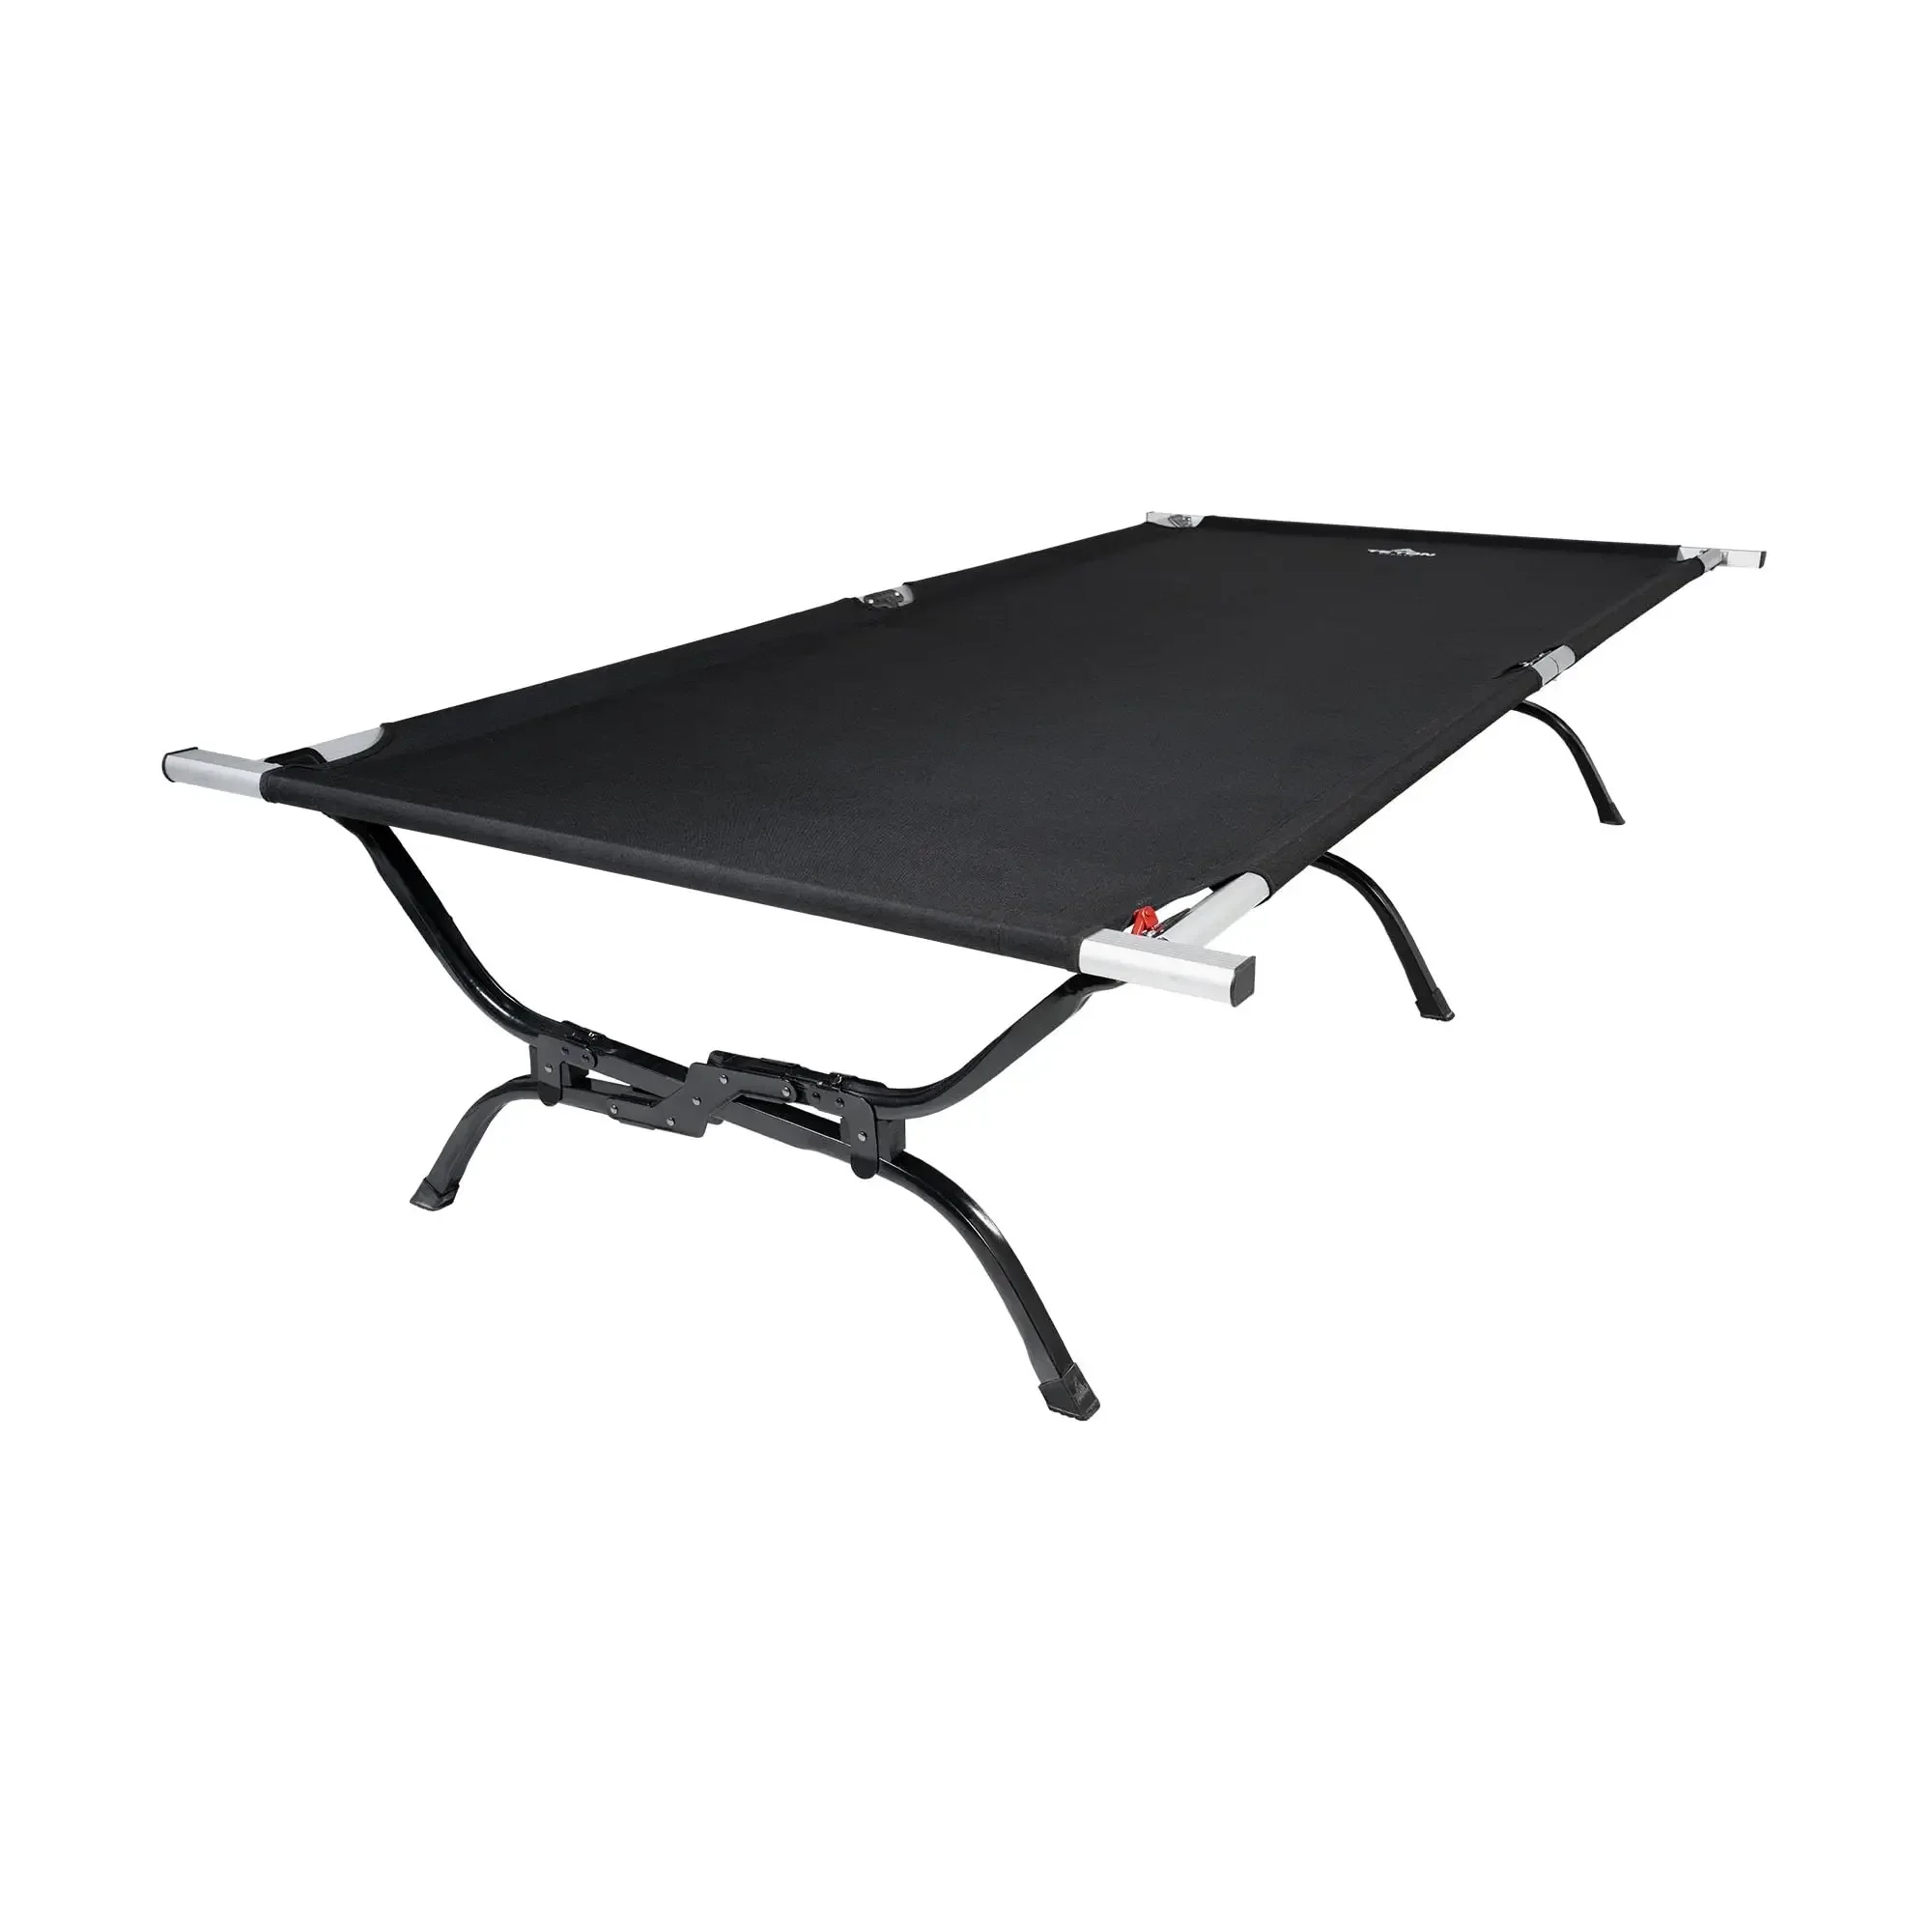 TETON Sports Camping Cot with Patented Pivot Arm - Folding Camping Cot for Car & Tent Camping - Durable Canvas Sleeping Cot - Po